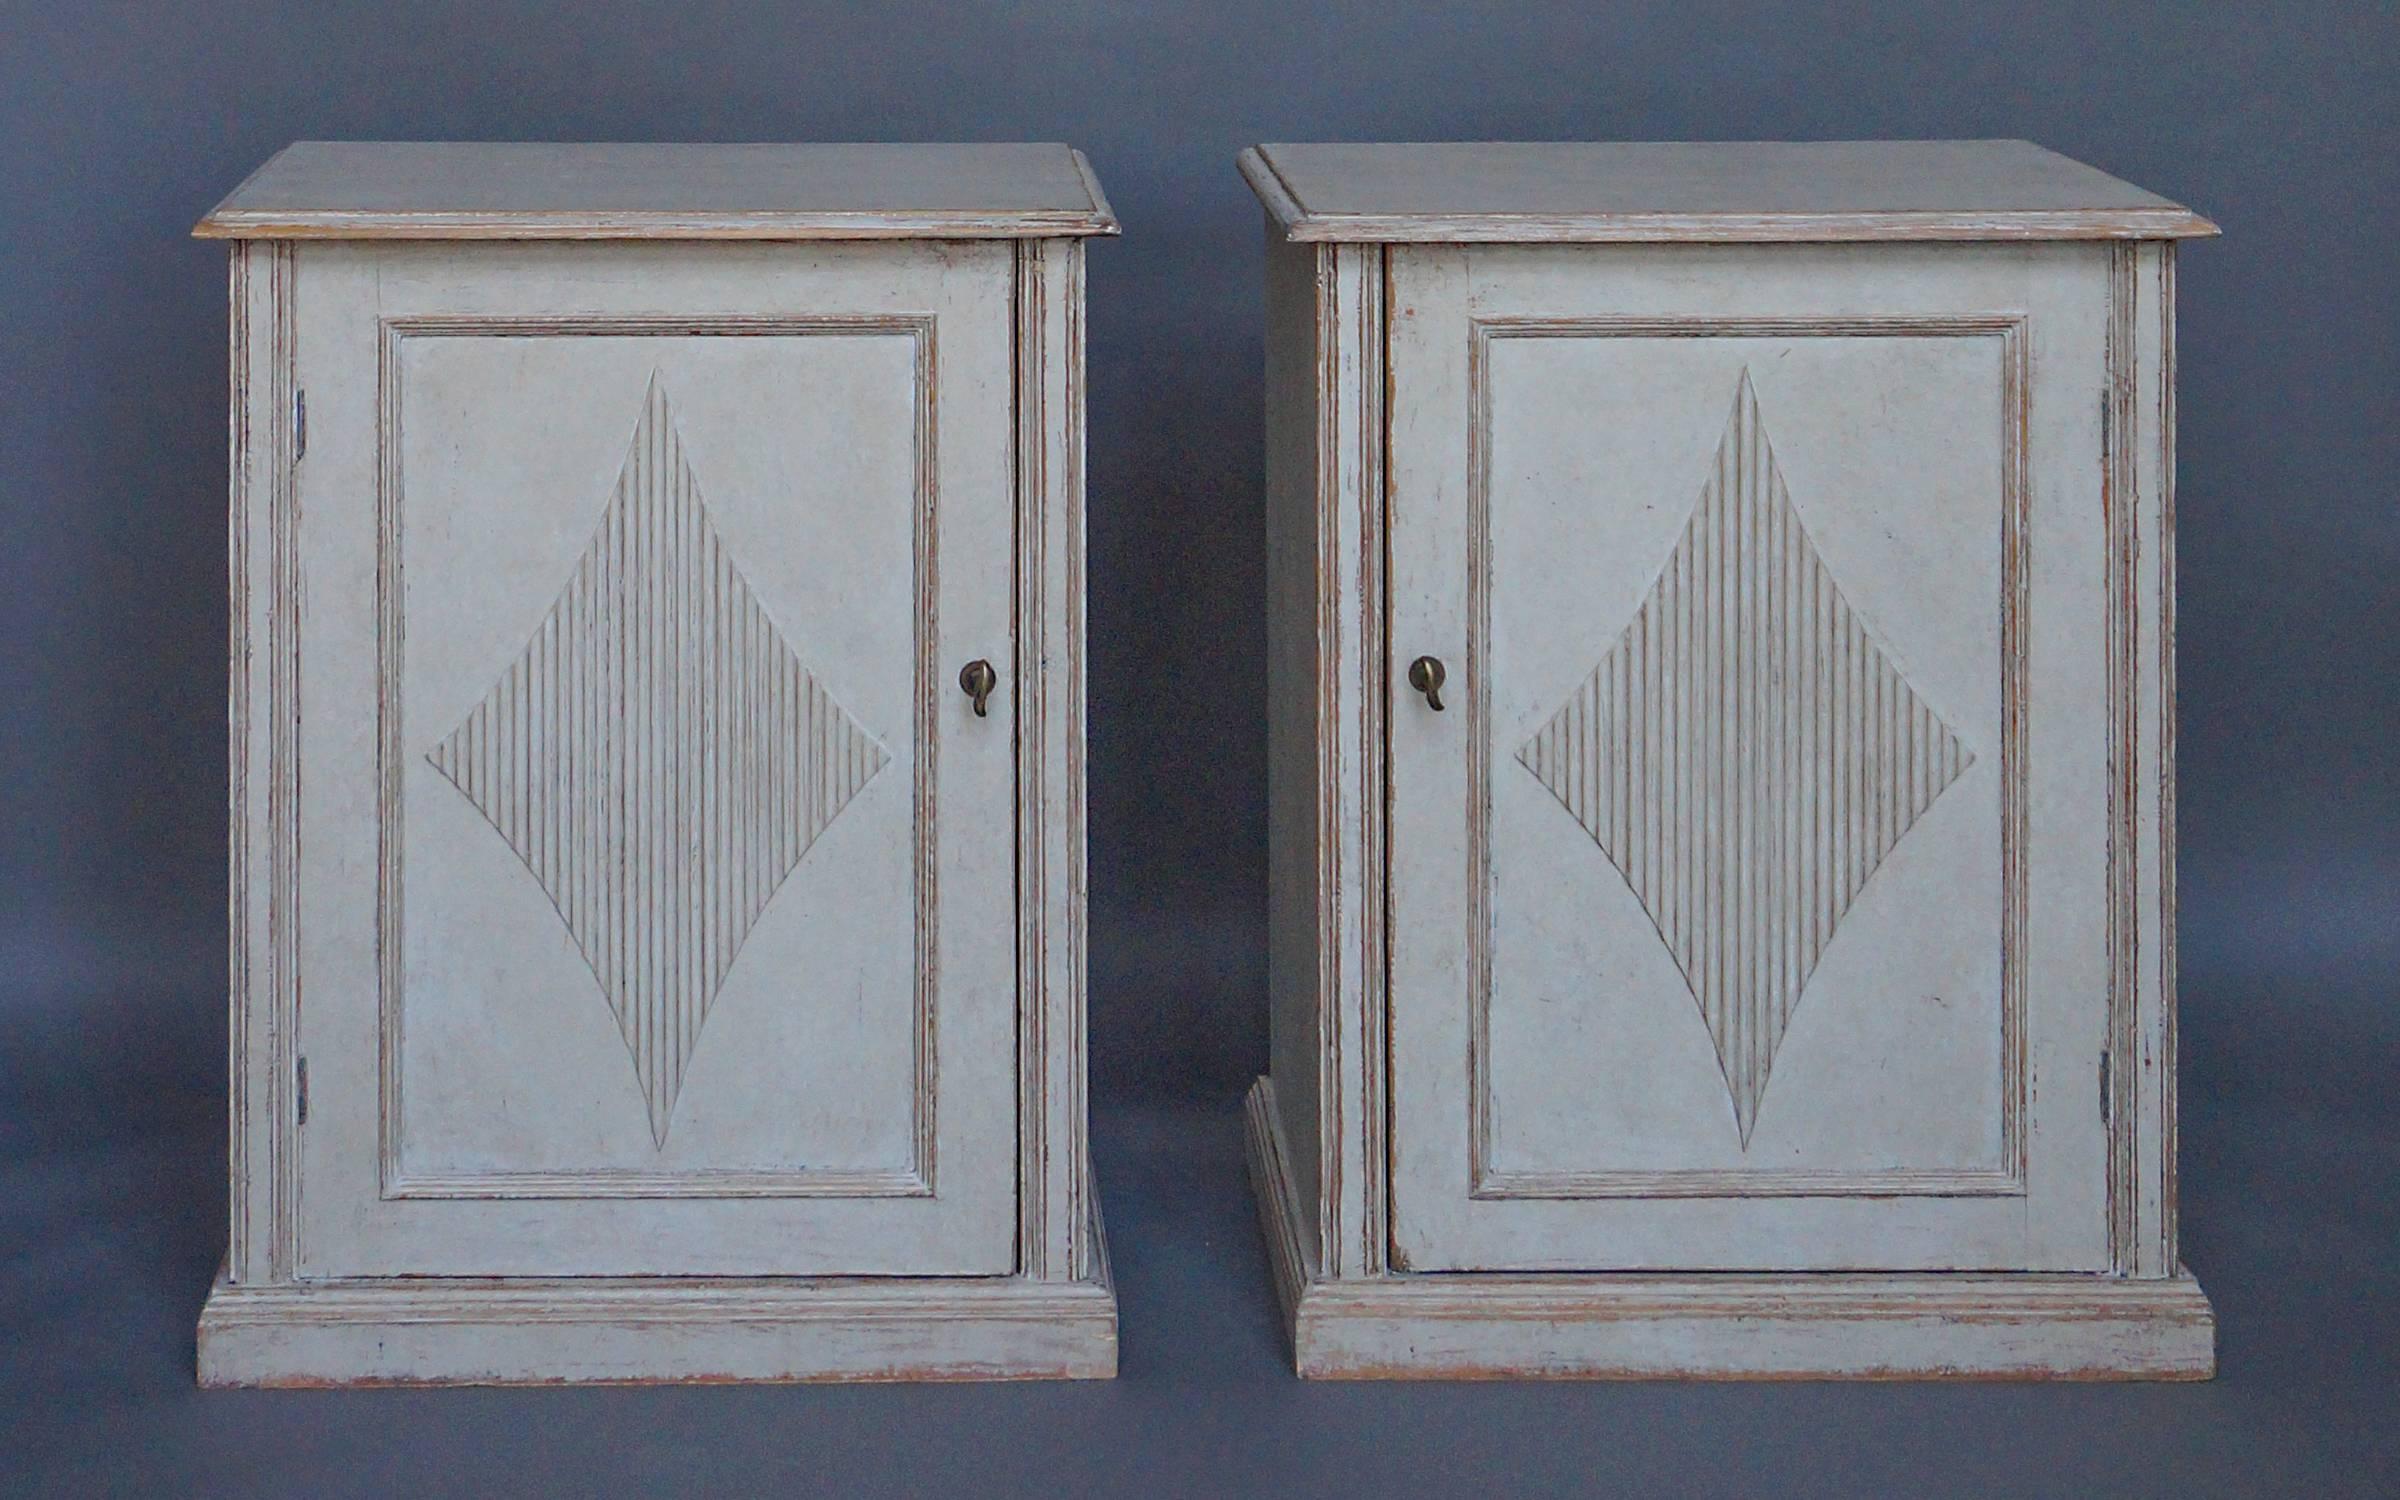 Pair of Swedish cabinets, circa 1880 in the Gustavian style. Paneled doors with reeded lozenges and a single interior shelf in each.